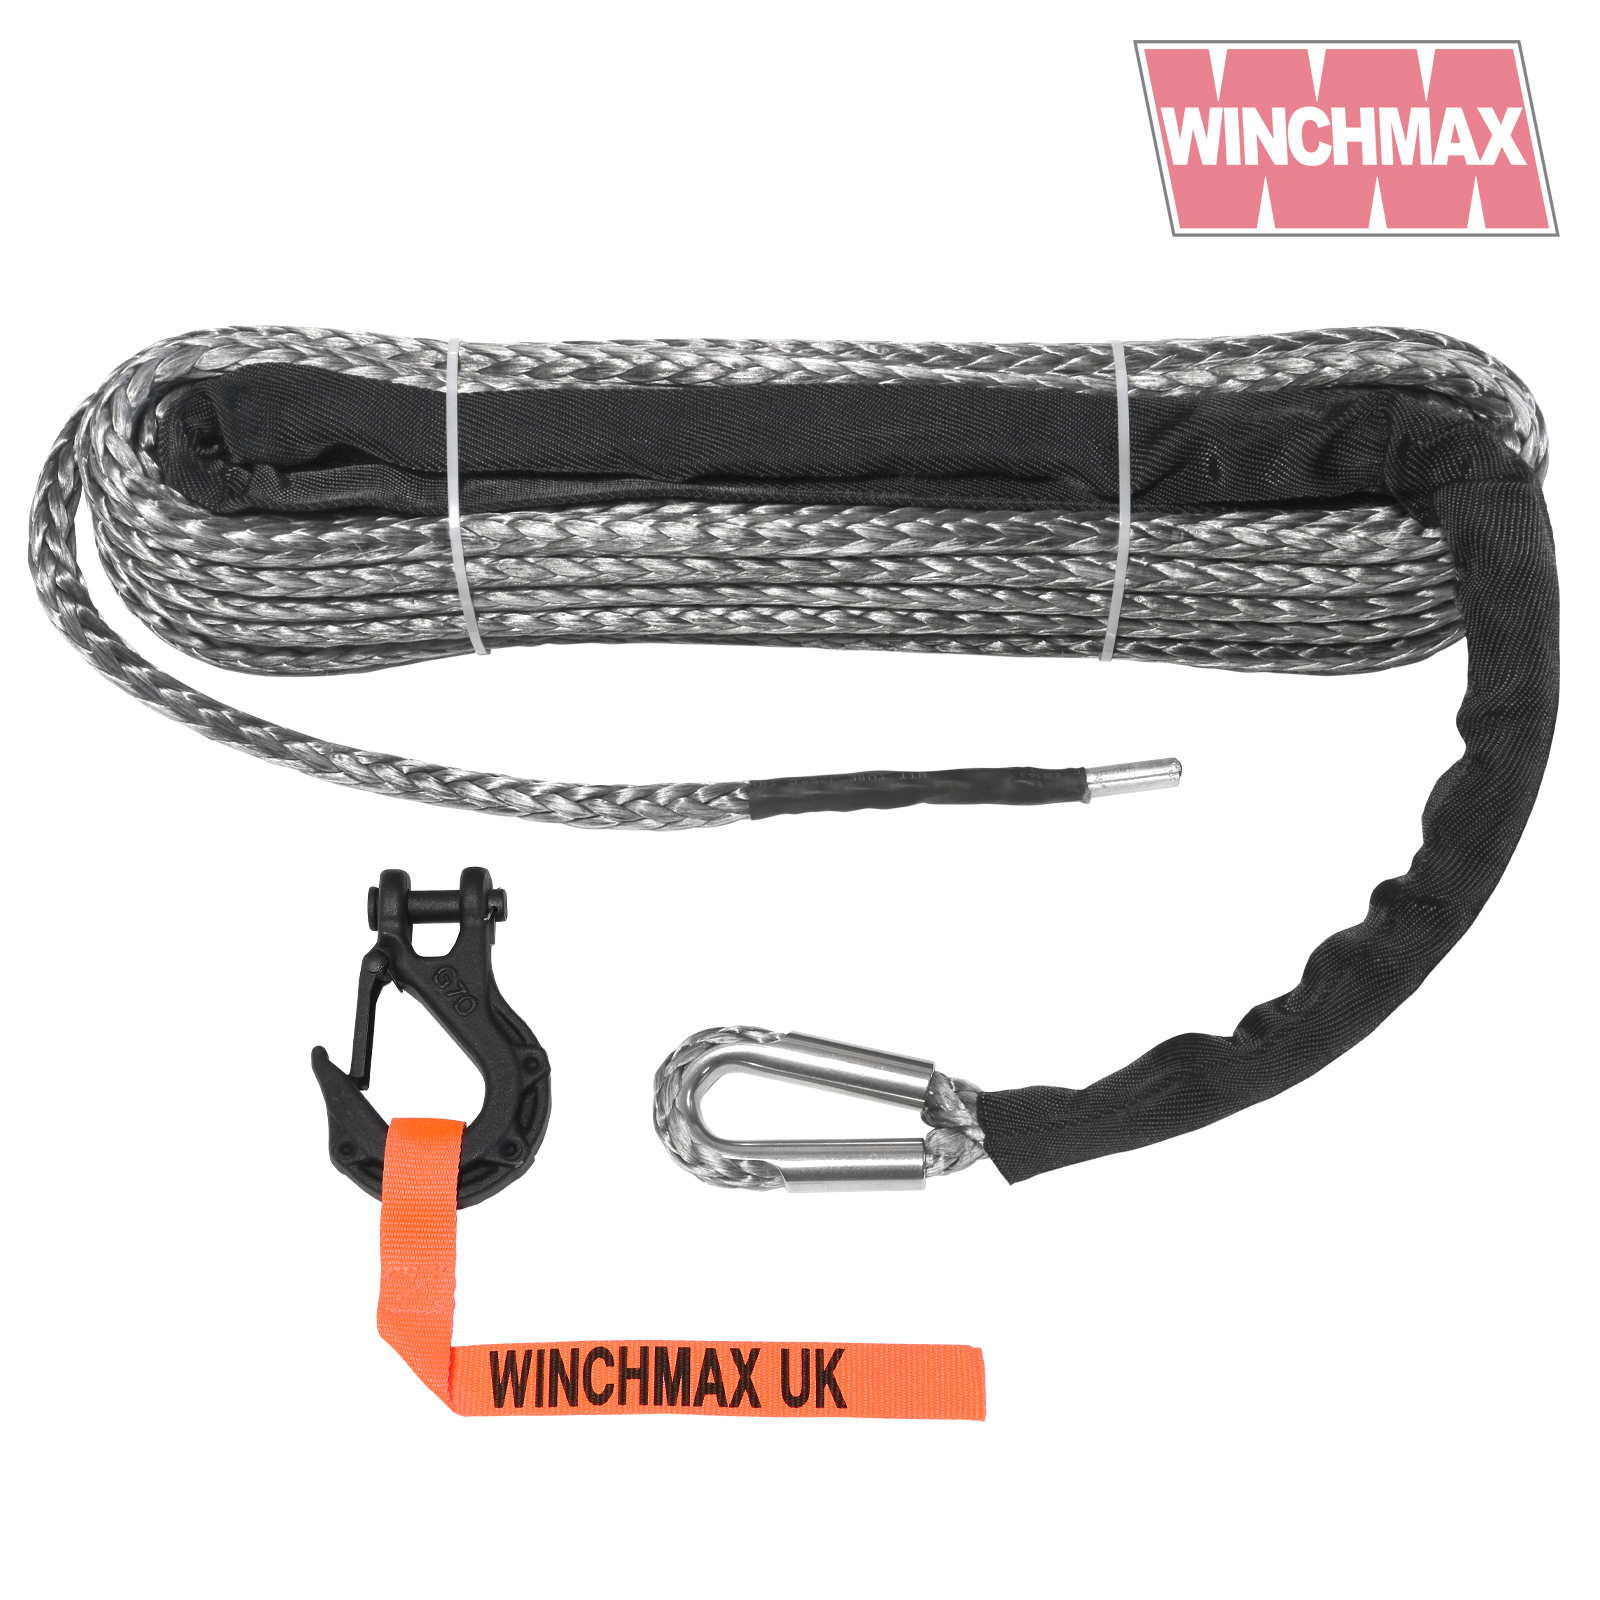 Premium Quality Synthetic Winch Rope 28m x 11mm, Hole Fix. 3/8